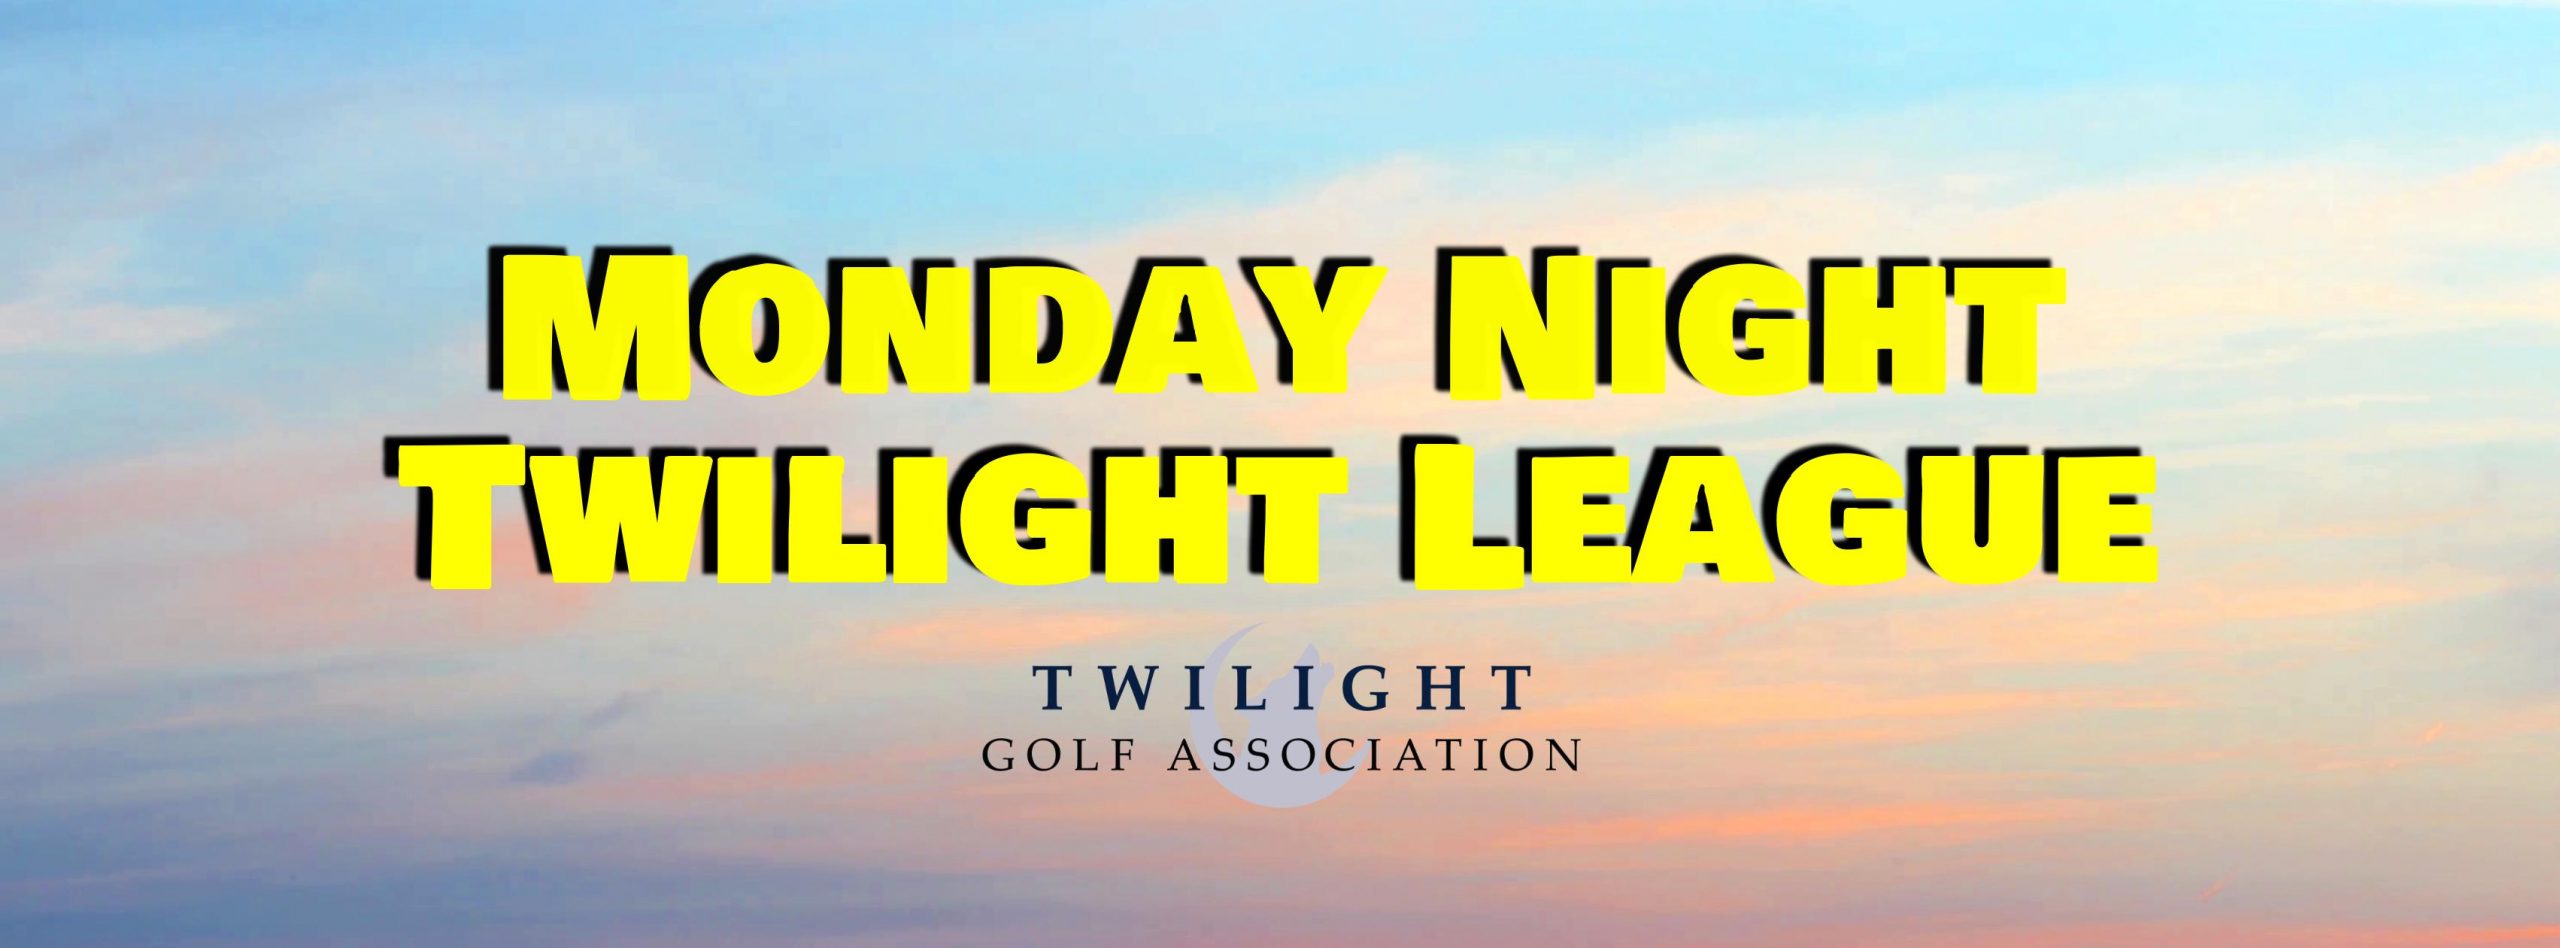 Monday Twilight League at Sycamore Creek Golf Course